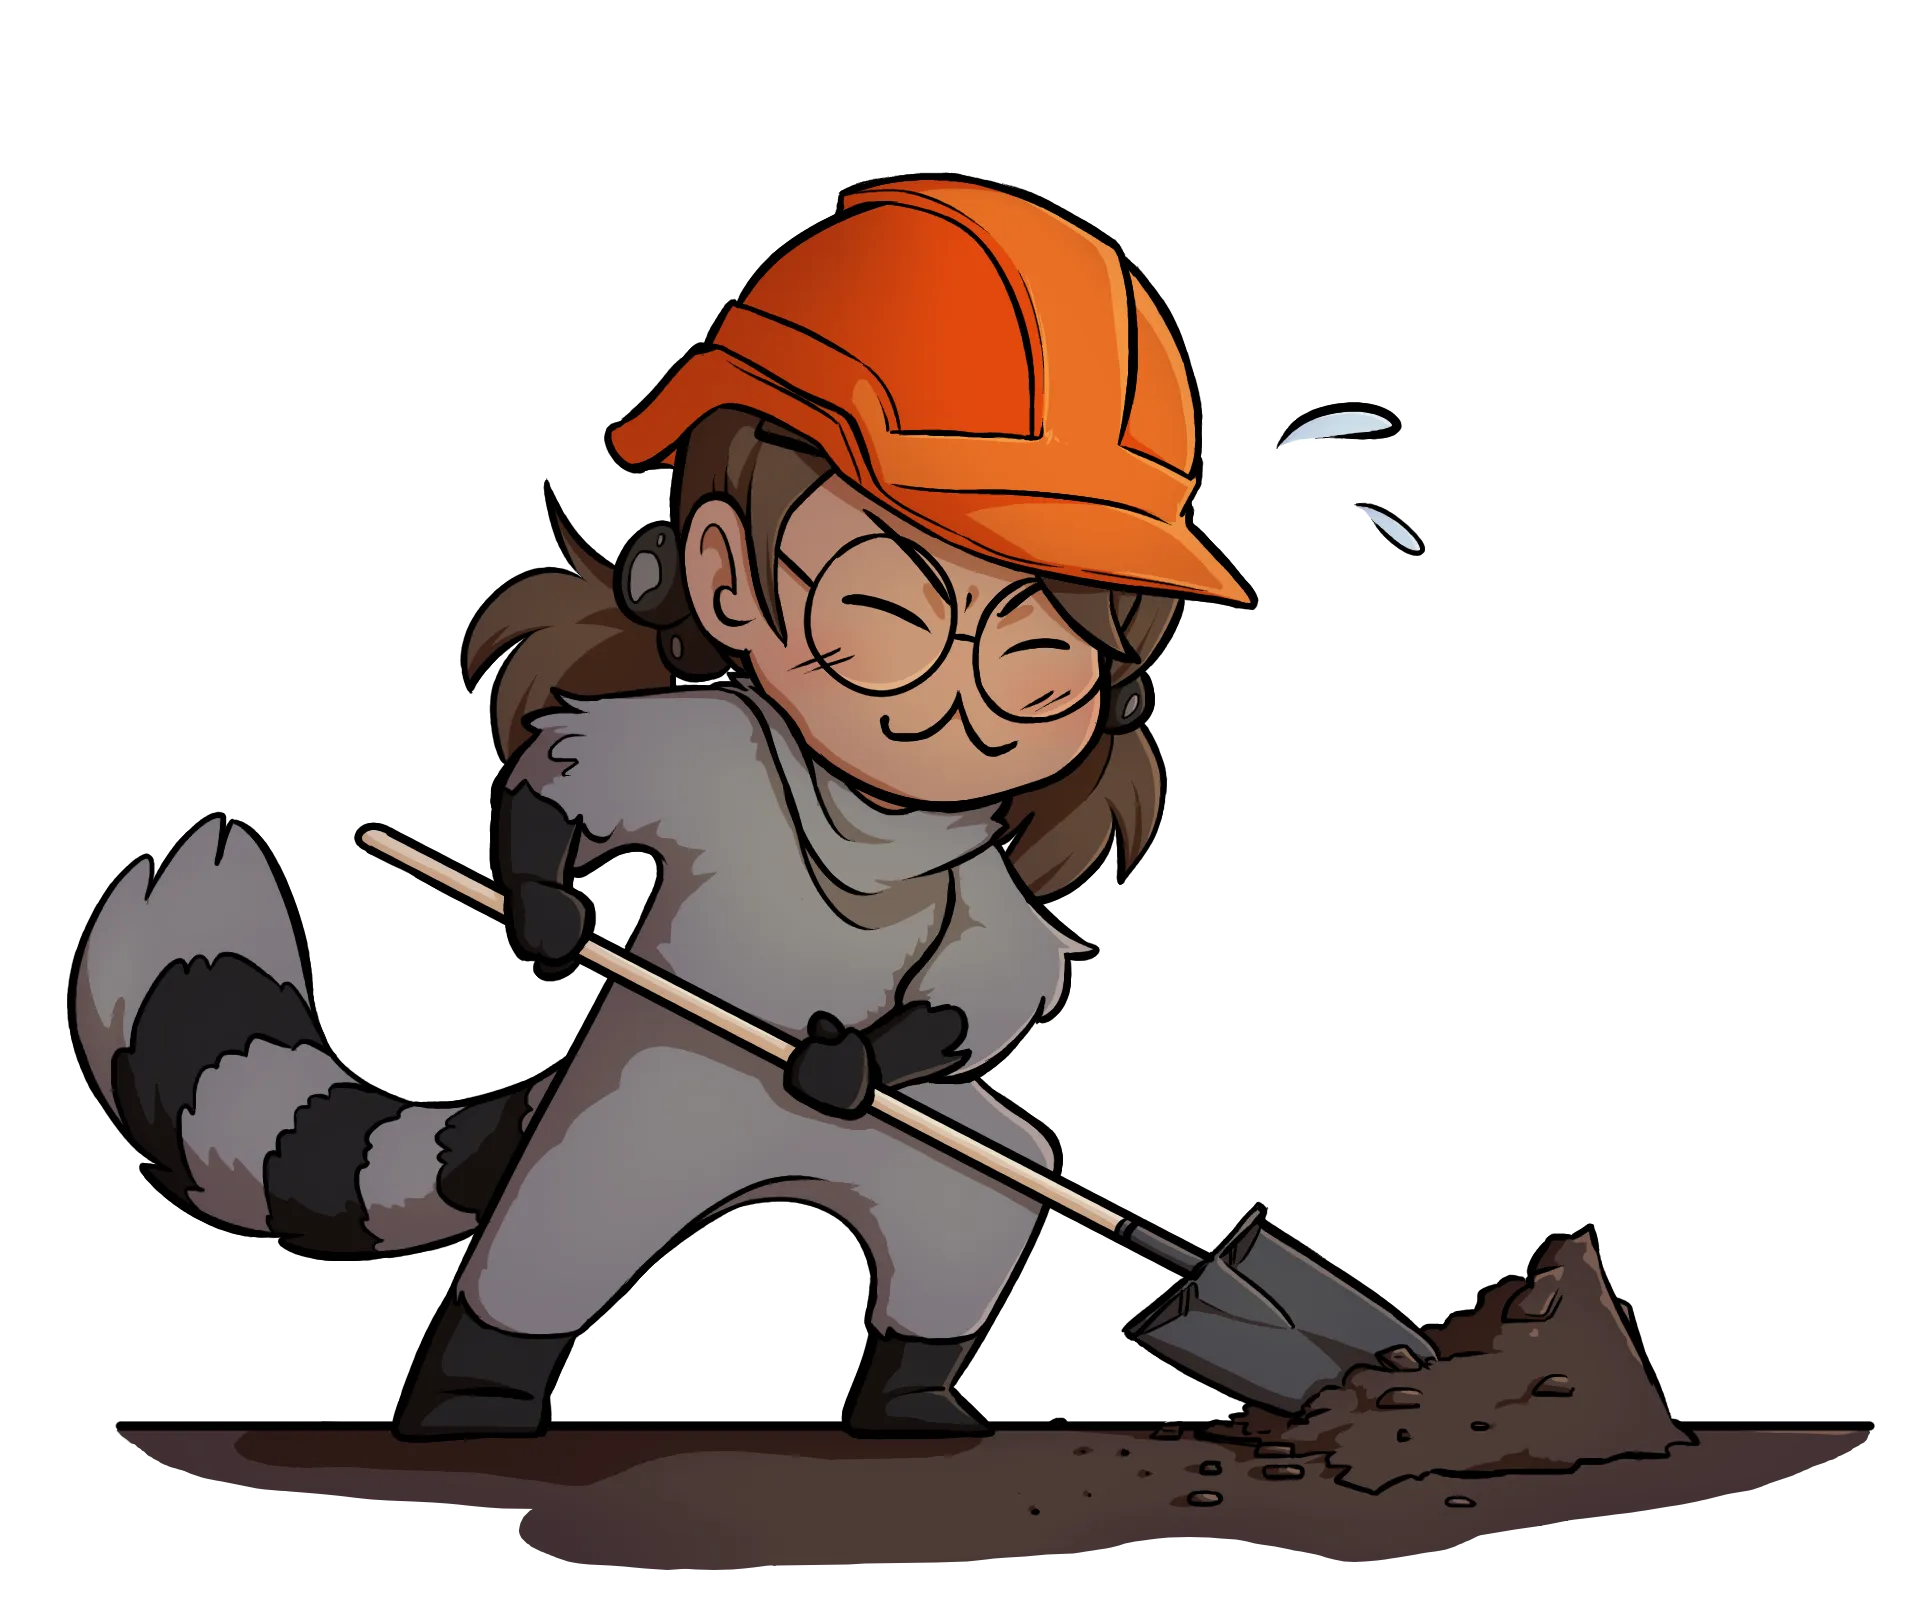 Boba-tan wearing a construction helmet and digging a hole.